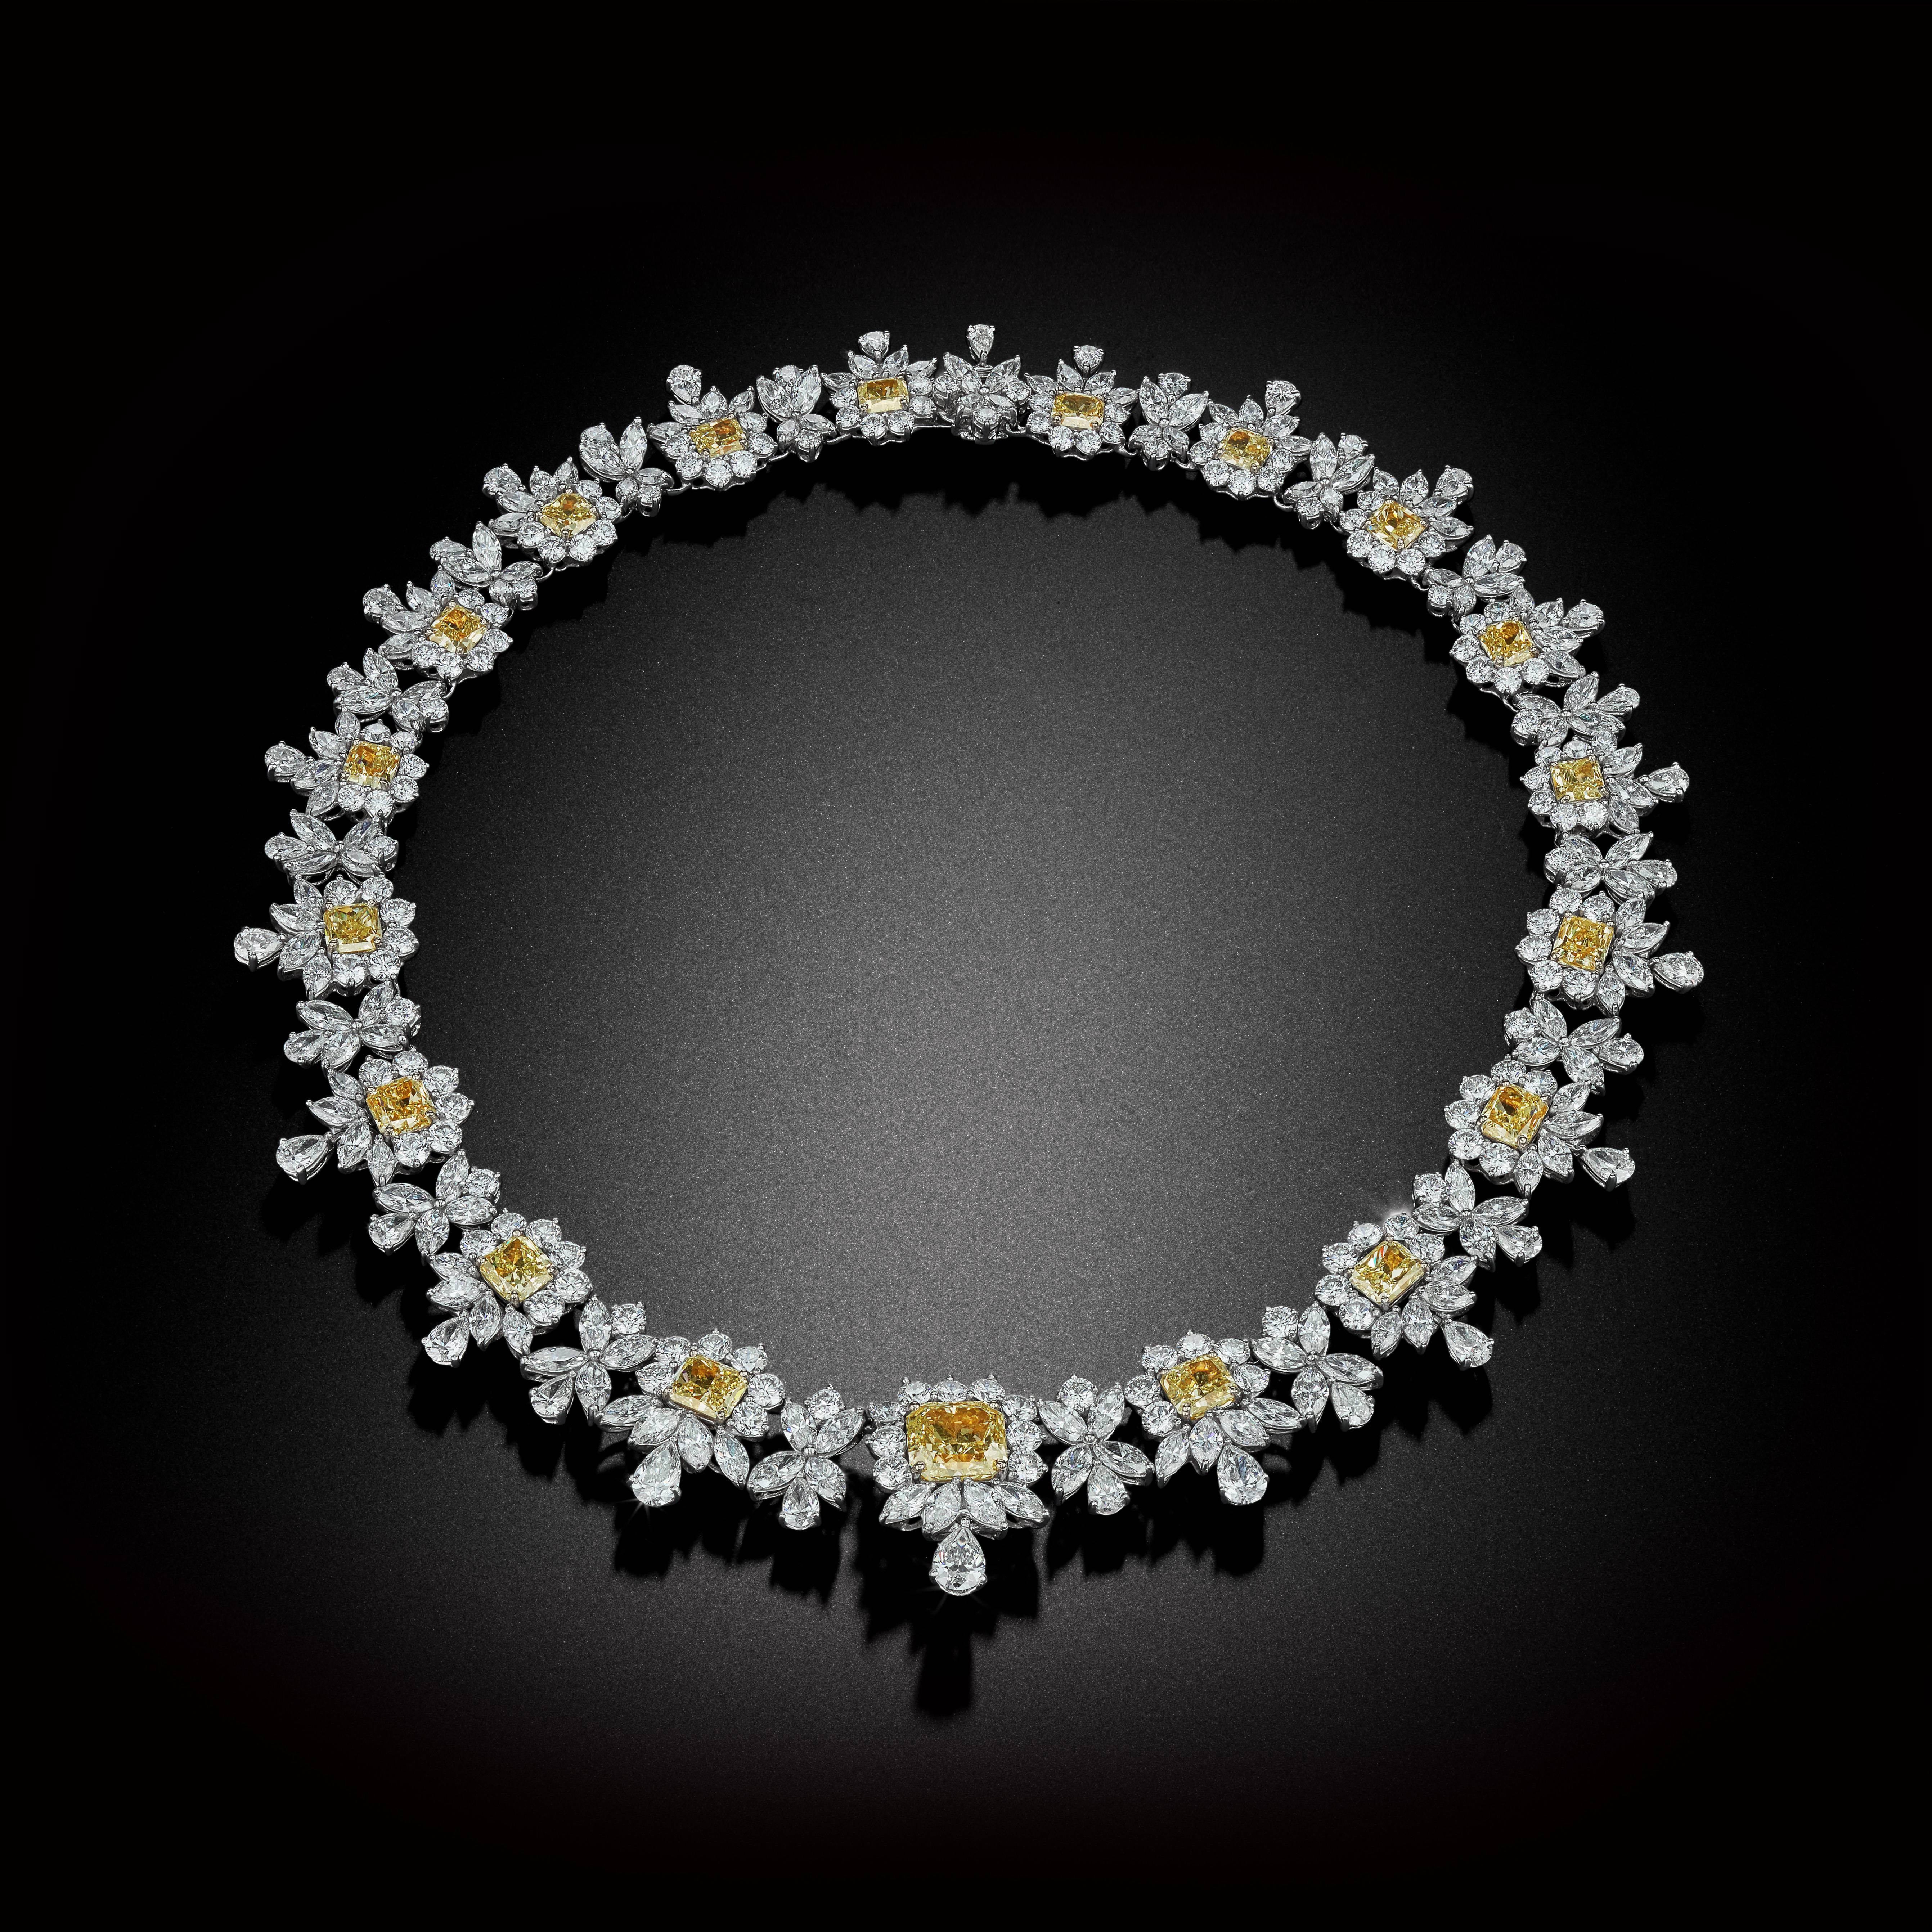 A Platinum and 18kt White & Fancy Yellow Diamond Necklace features approximate combined total weight of 135.32ct of impeccable white marquise and pear shapes within floral motifs surrounding 19 incredibly rare radiant fancy yellow diamonds.

David